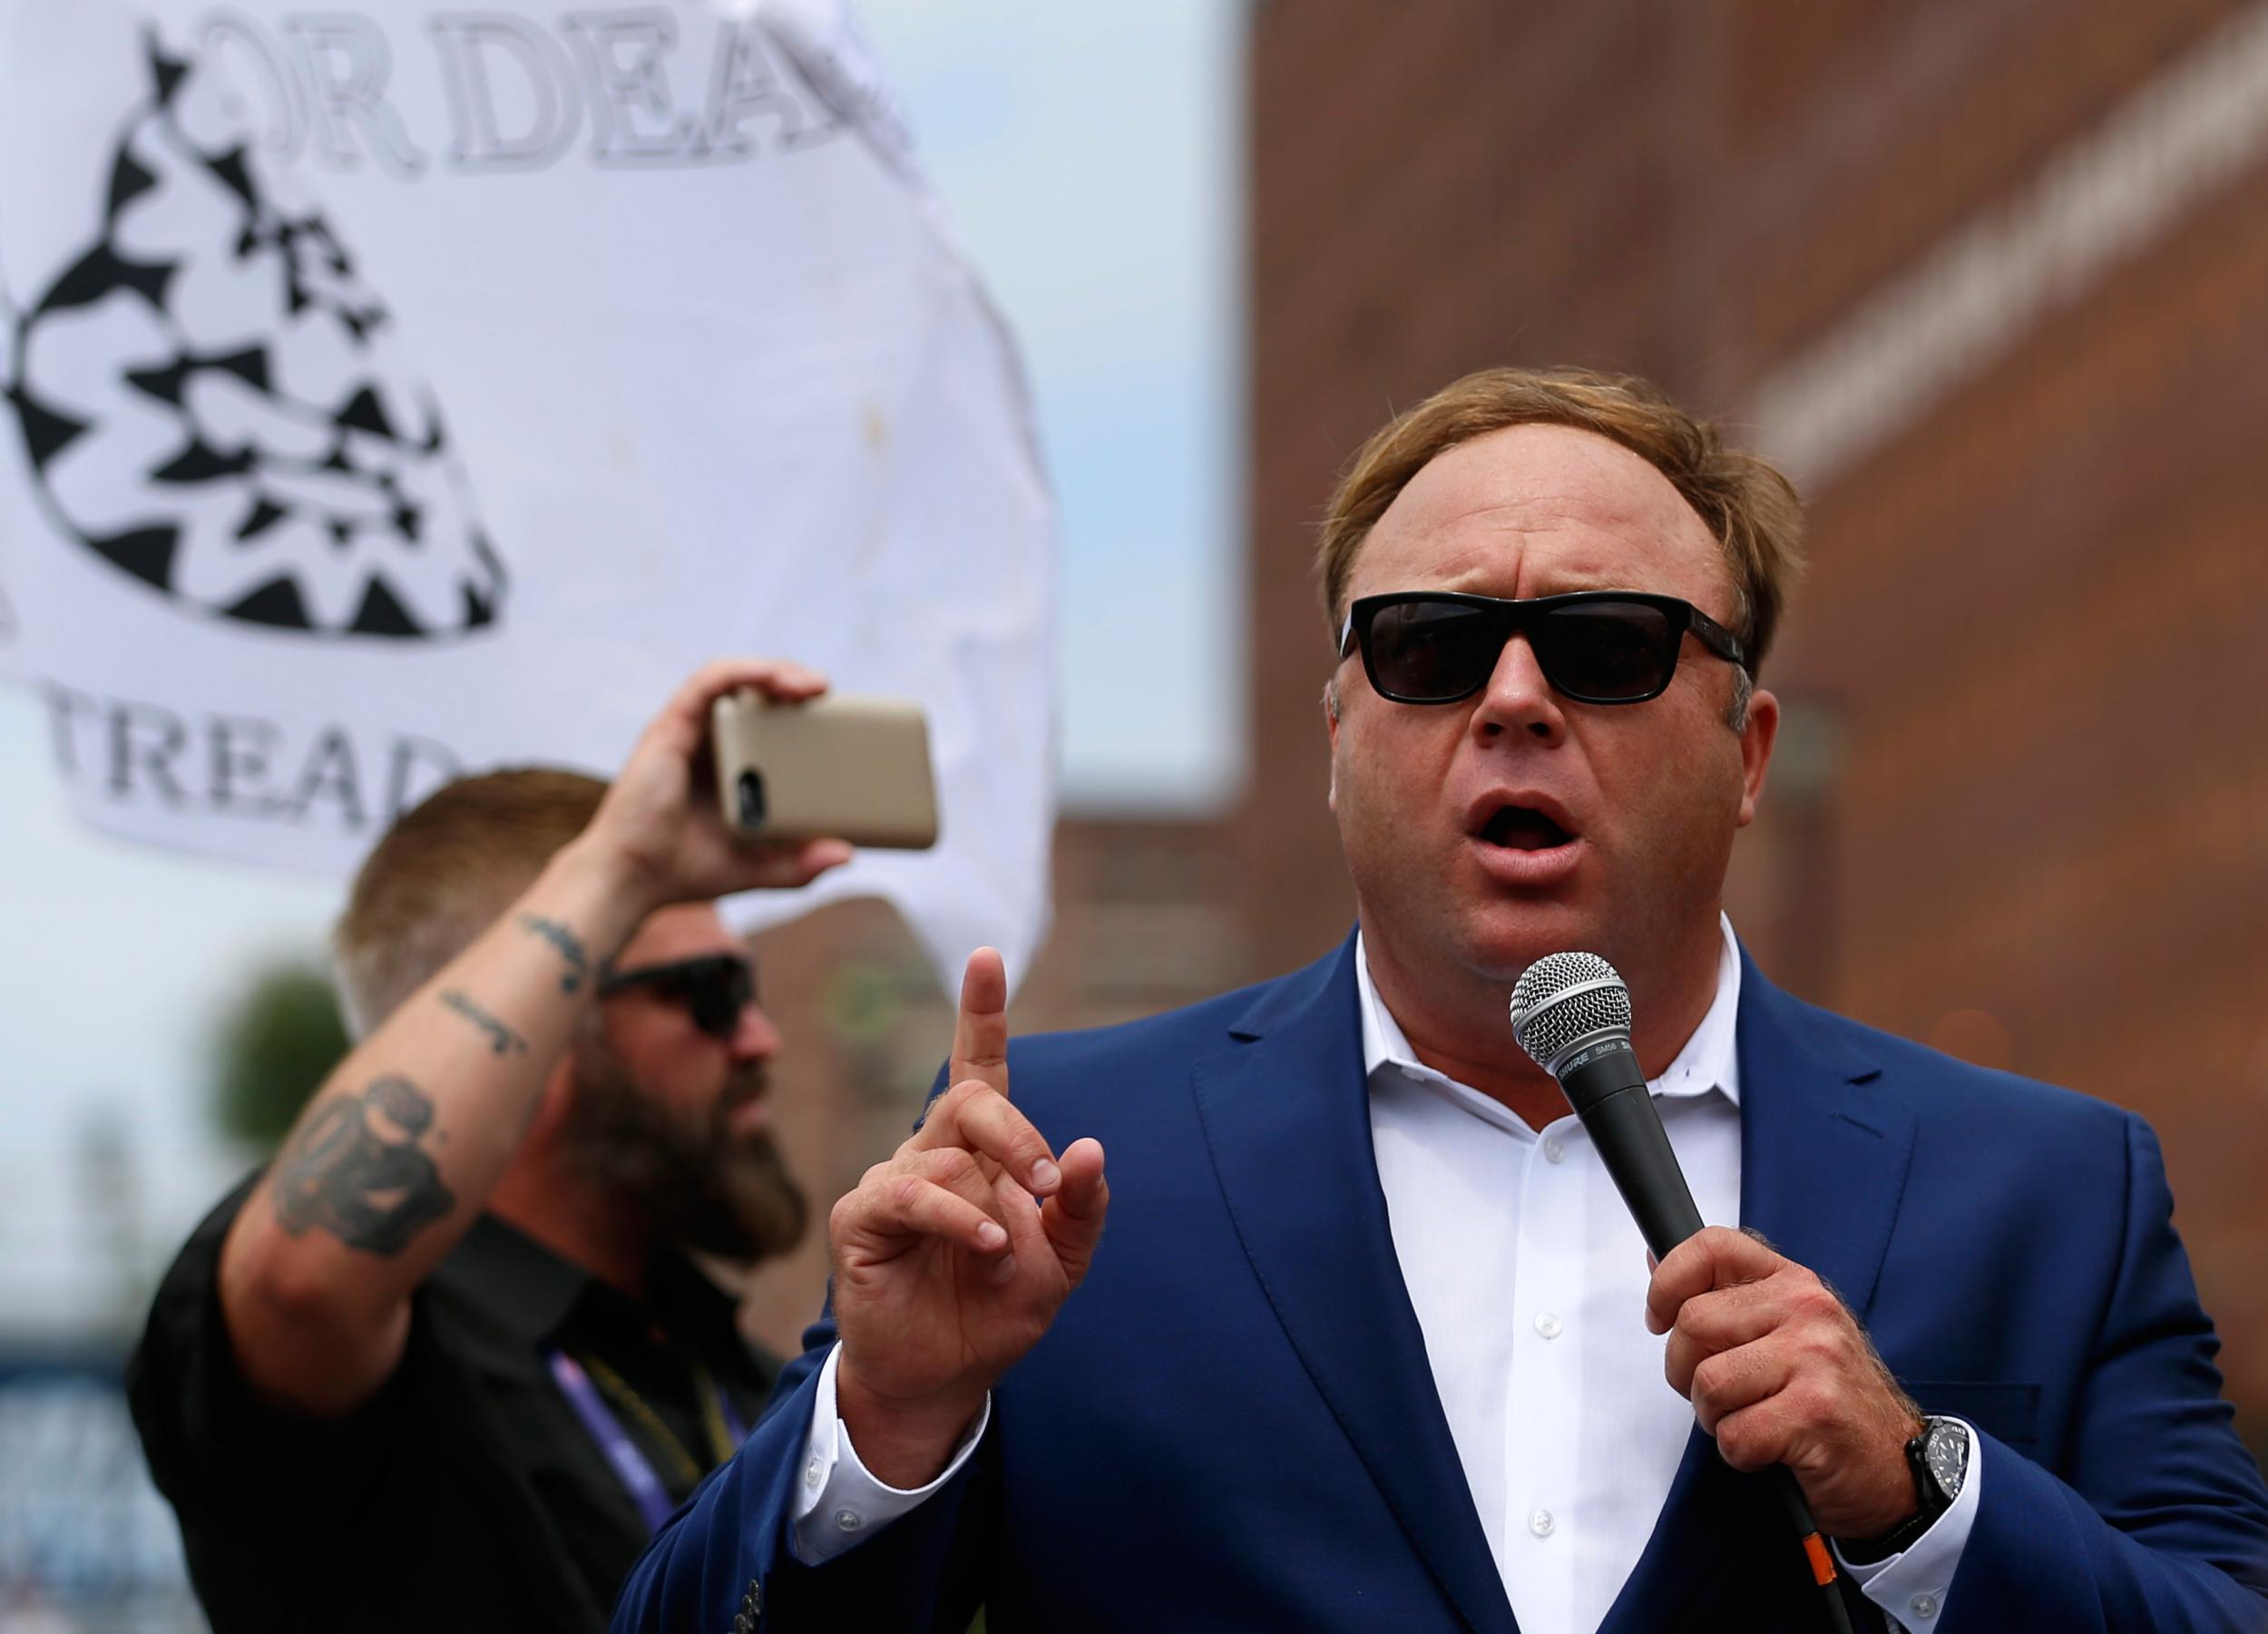 Alex Jones from Infowars.com speaks during a rally in support of Republican presidential candidate Donald Trump near the Republican National Convention